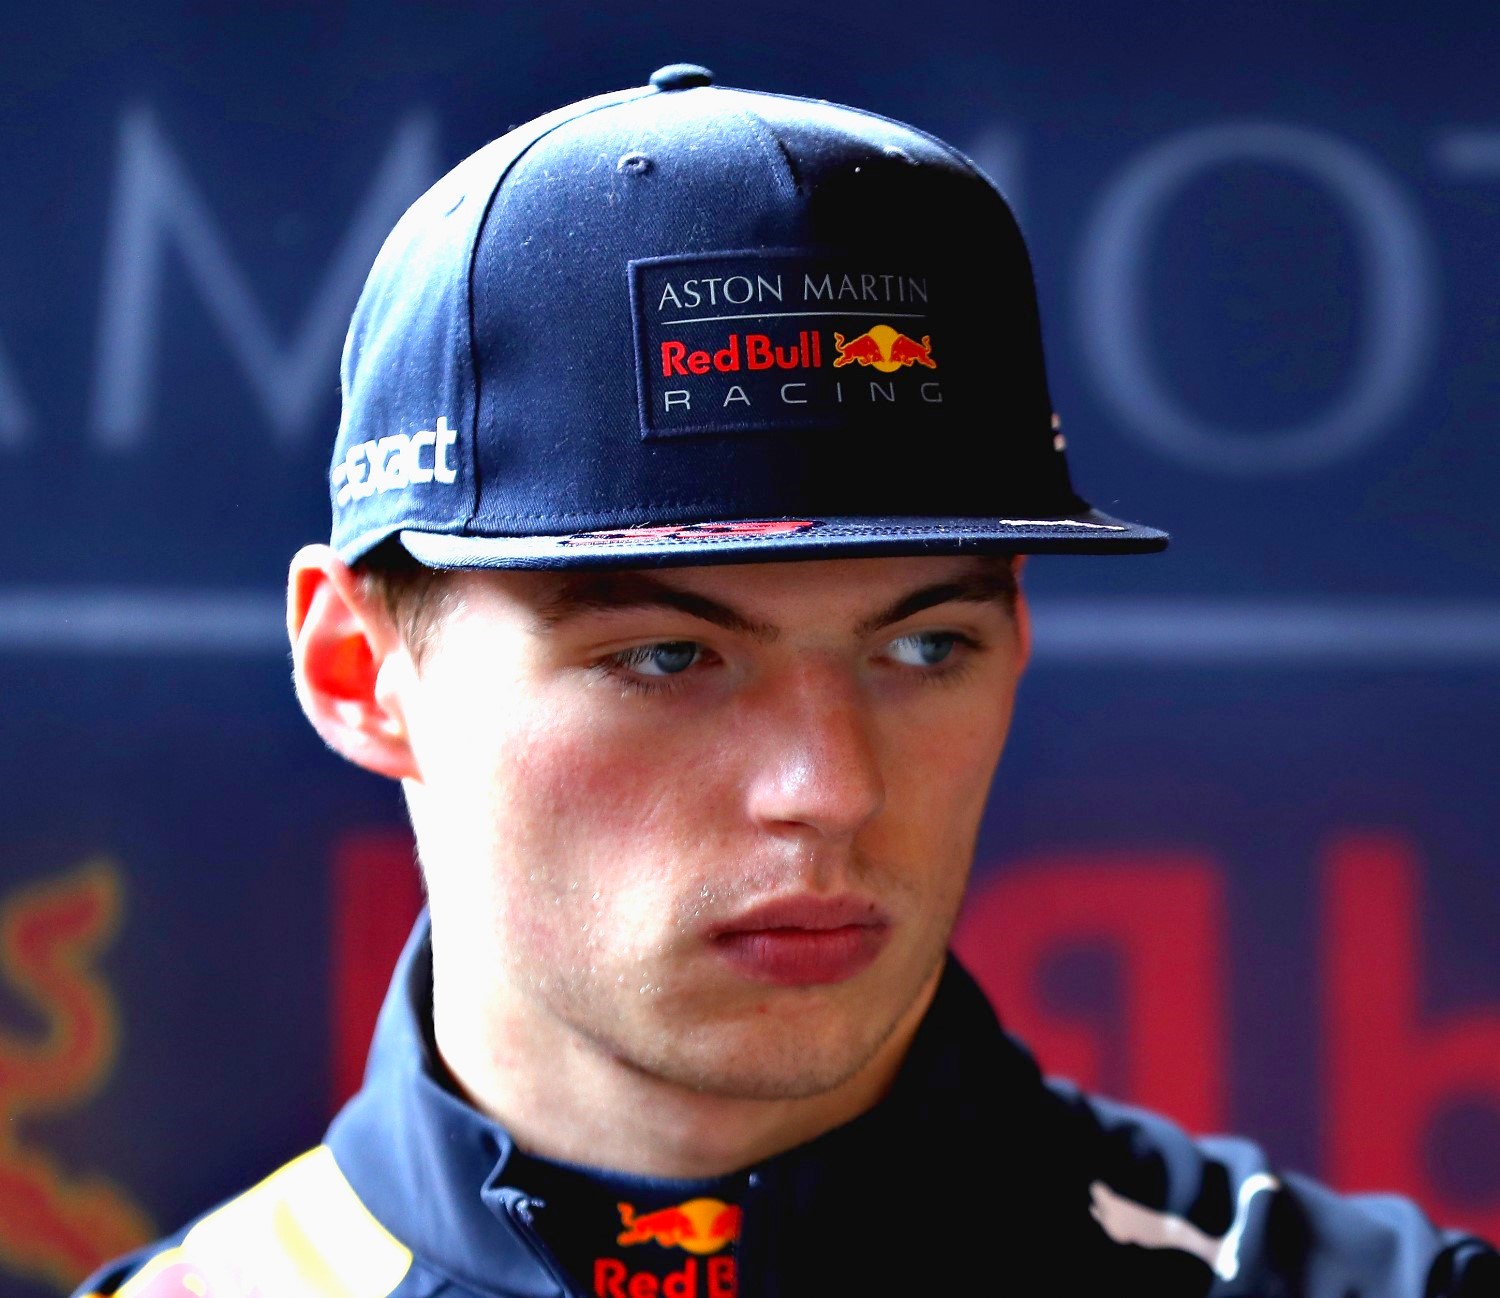 Verstappen makes so many dumb moves the F1 paddock wonders whether he will ever calm down